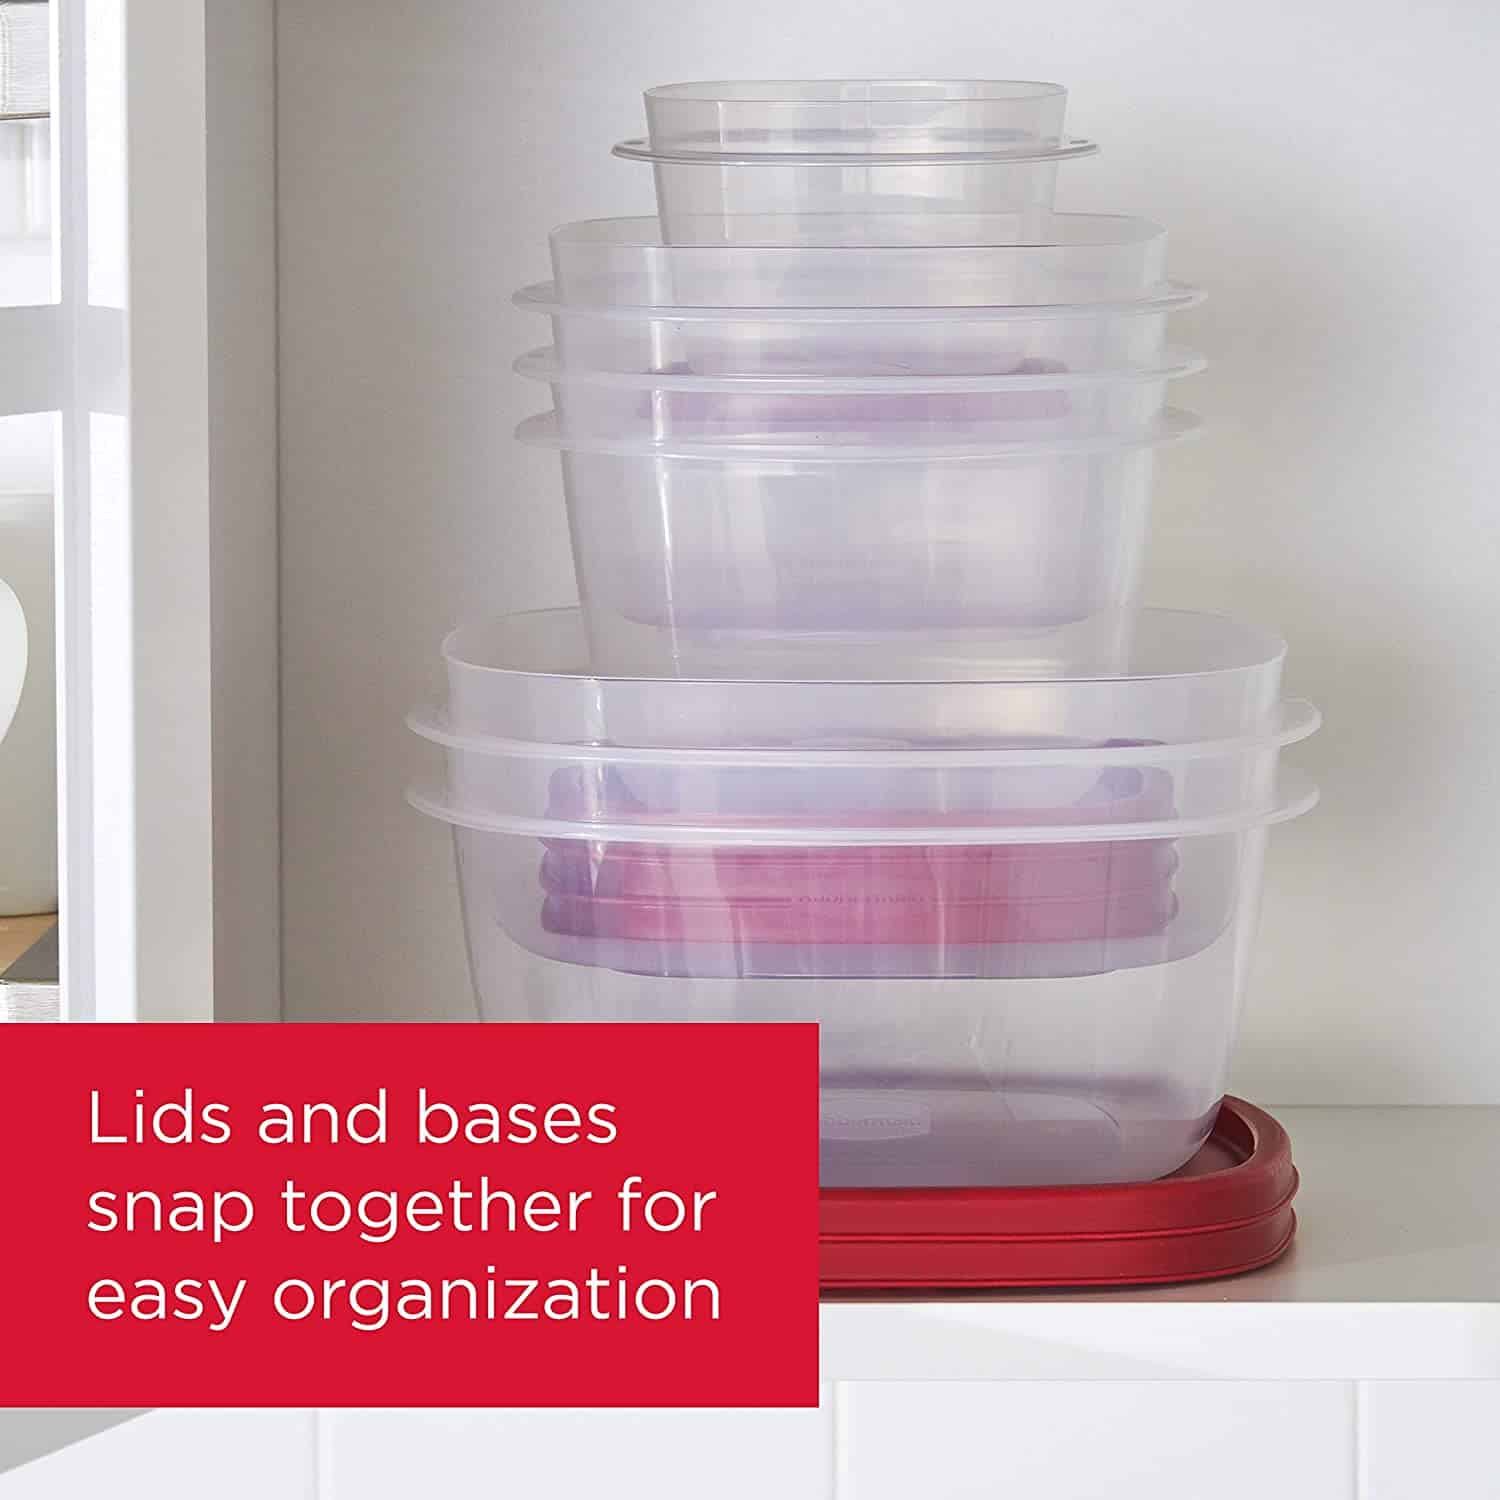 https://www.prioritizedliving.com/wp-content/uploads/2020/04/Rubbermaid-Easy-Find-containers.jpg